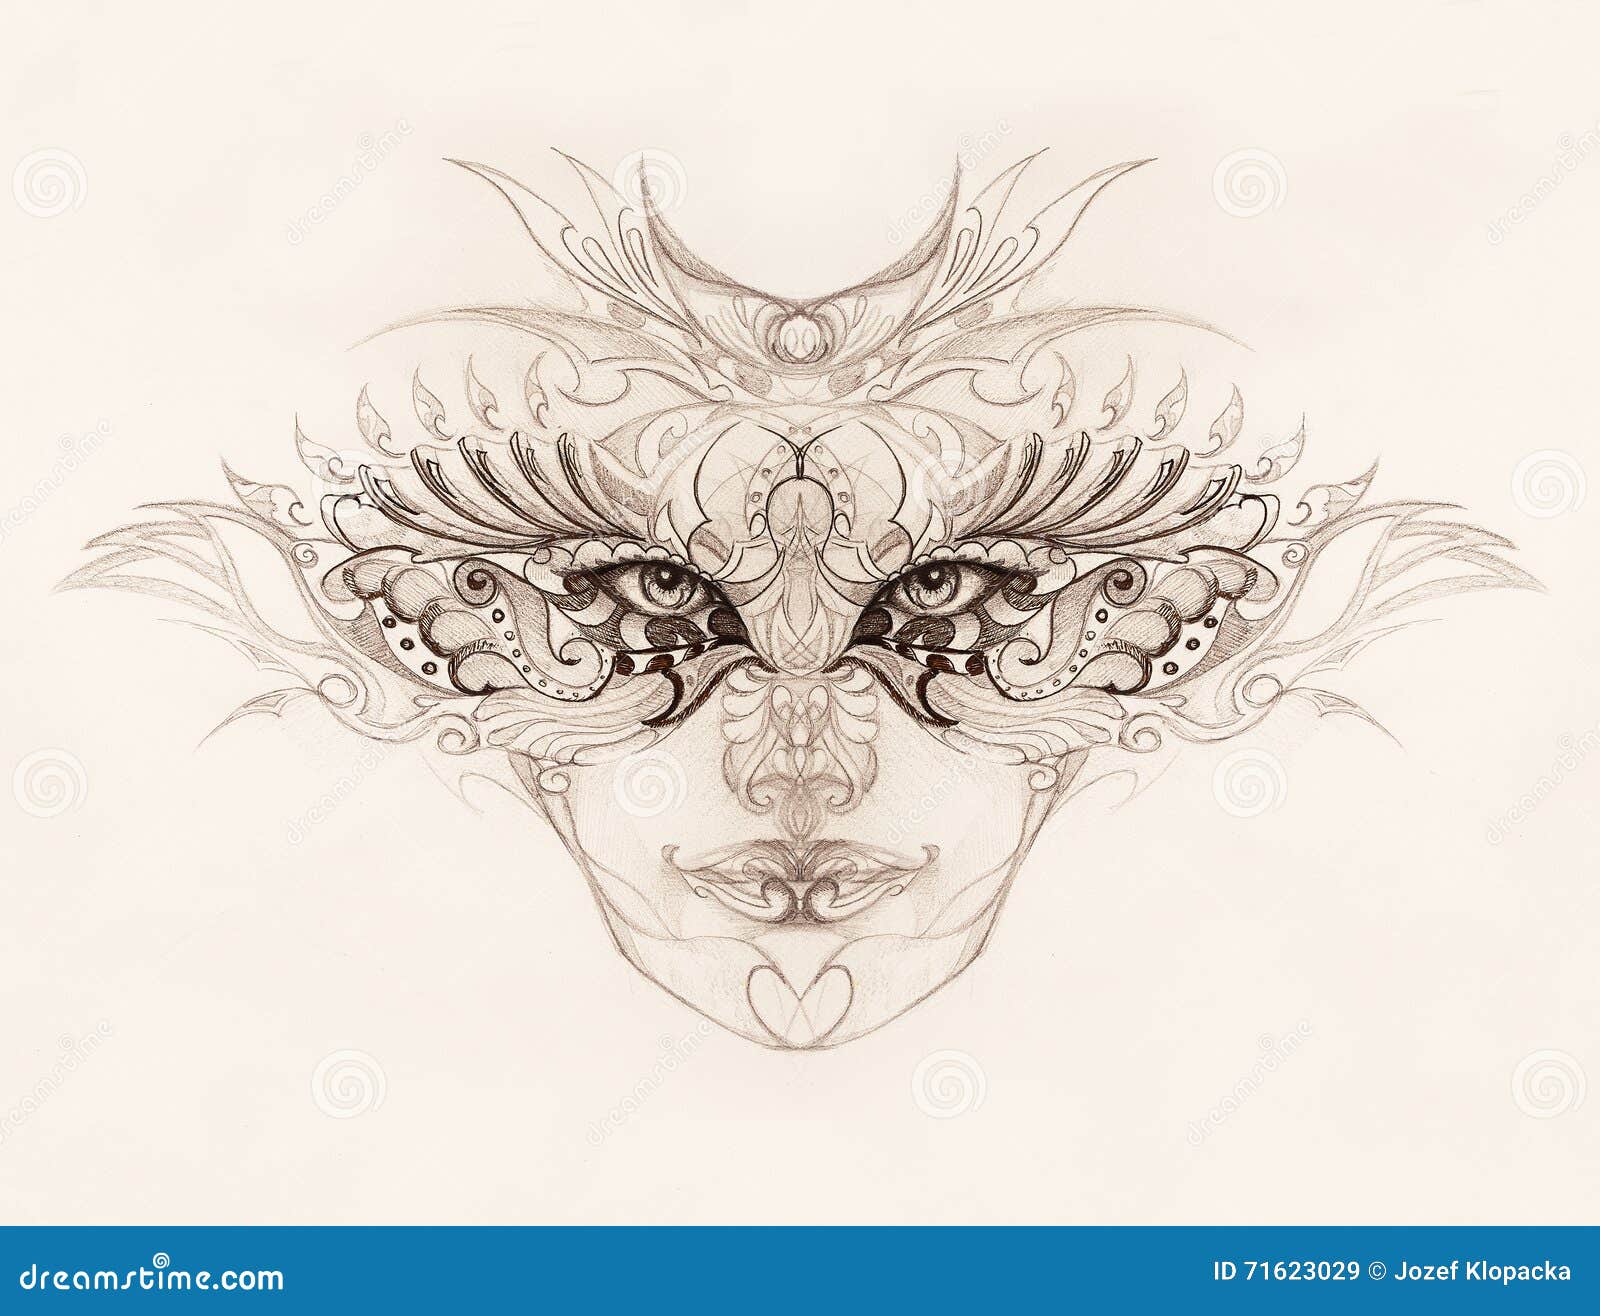 Mystic Woman Face With Floral Ornament Drawing On Paper Eye Contact Stock Illustration Illustration Of Fashion Abstract